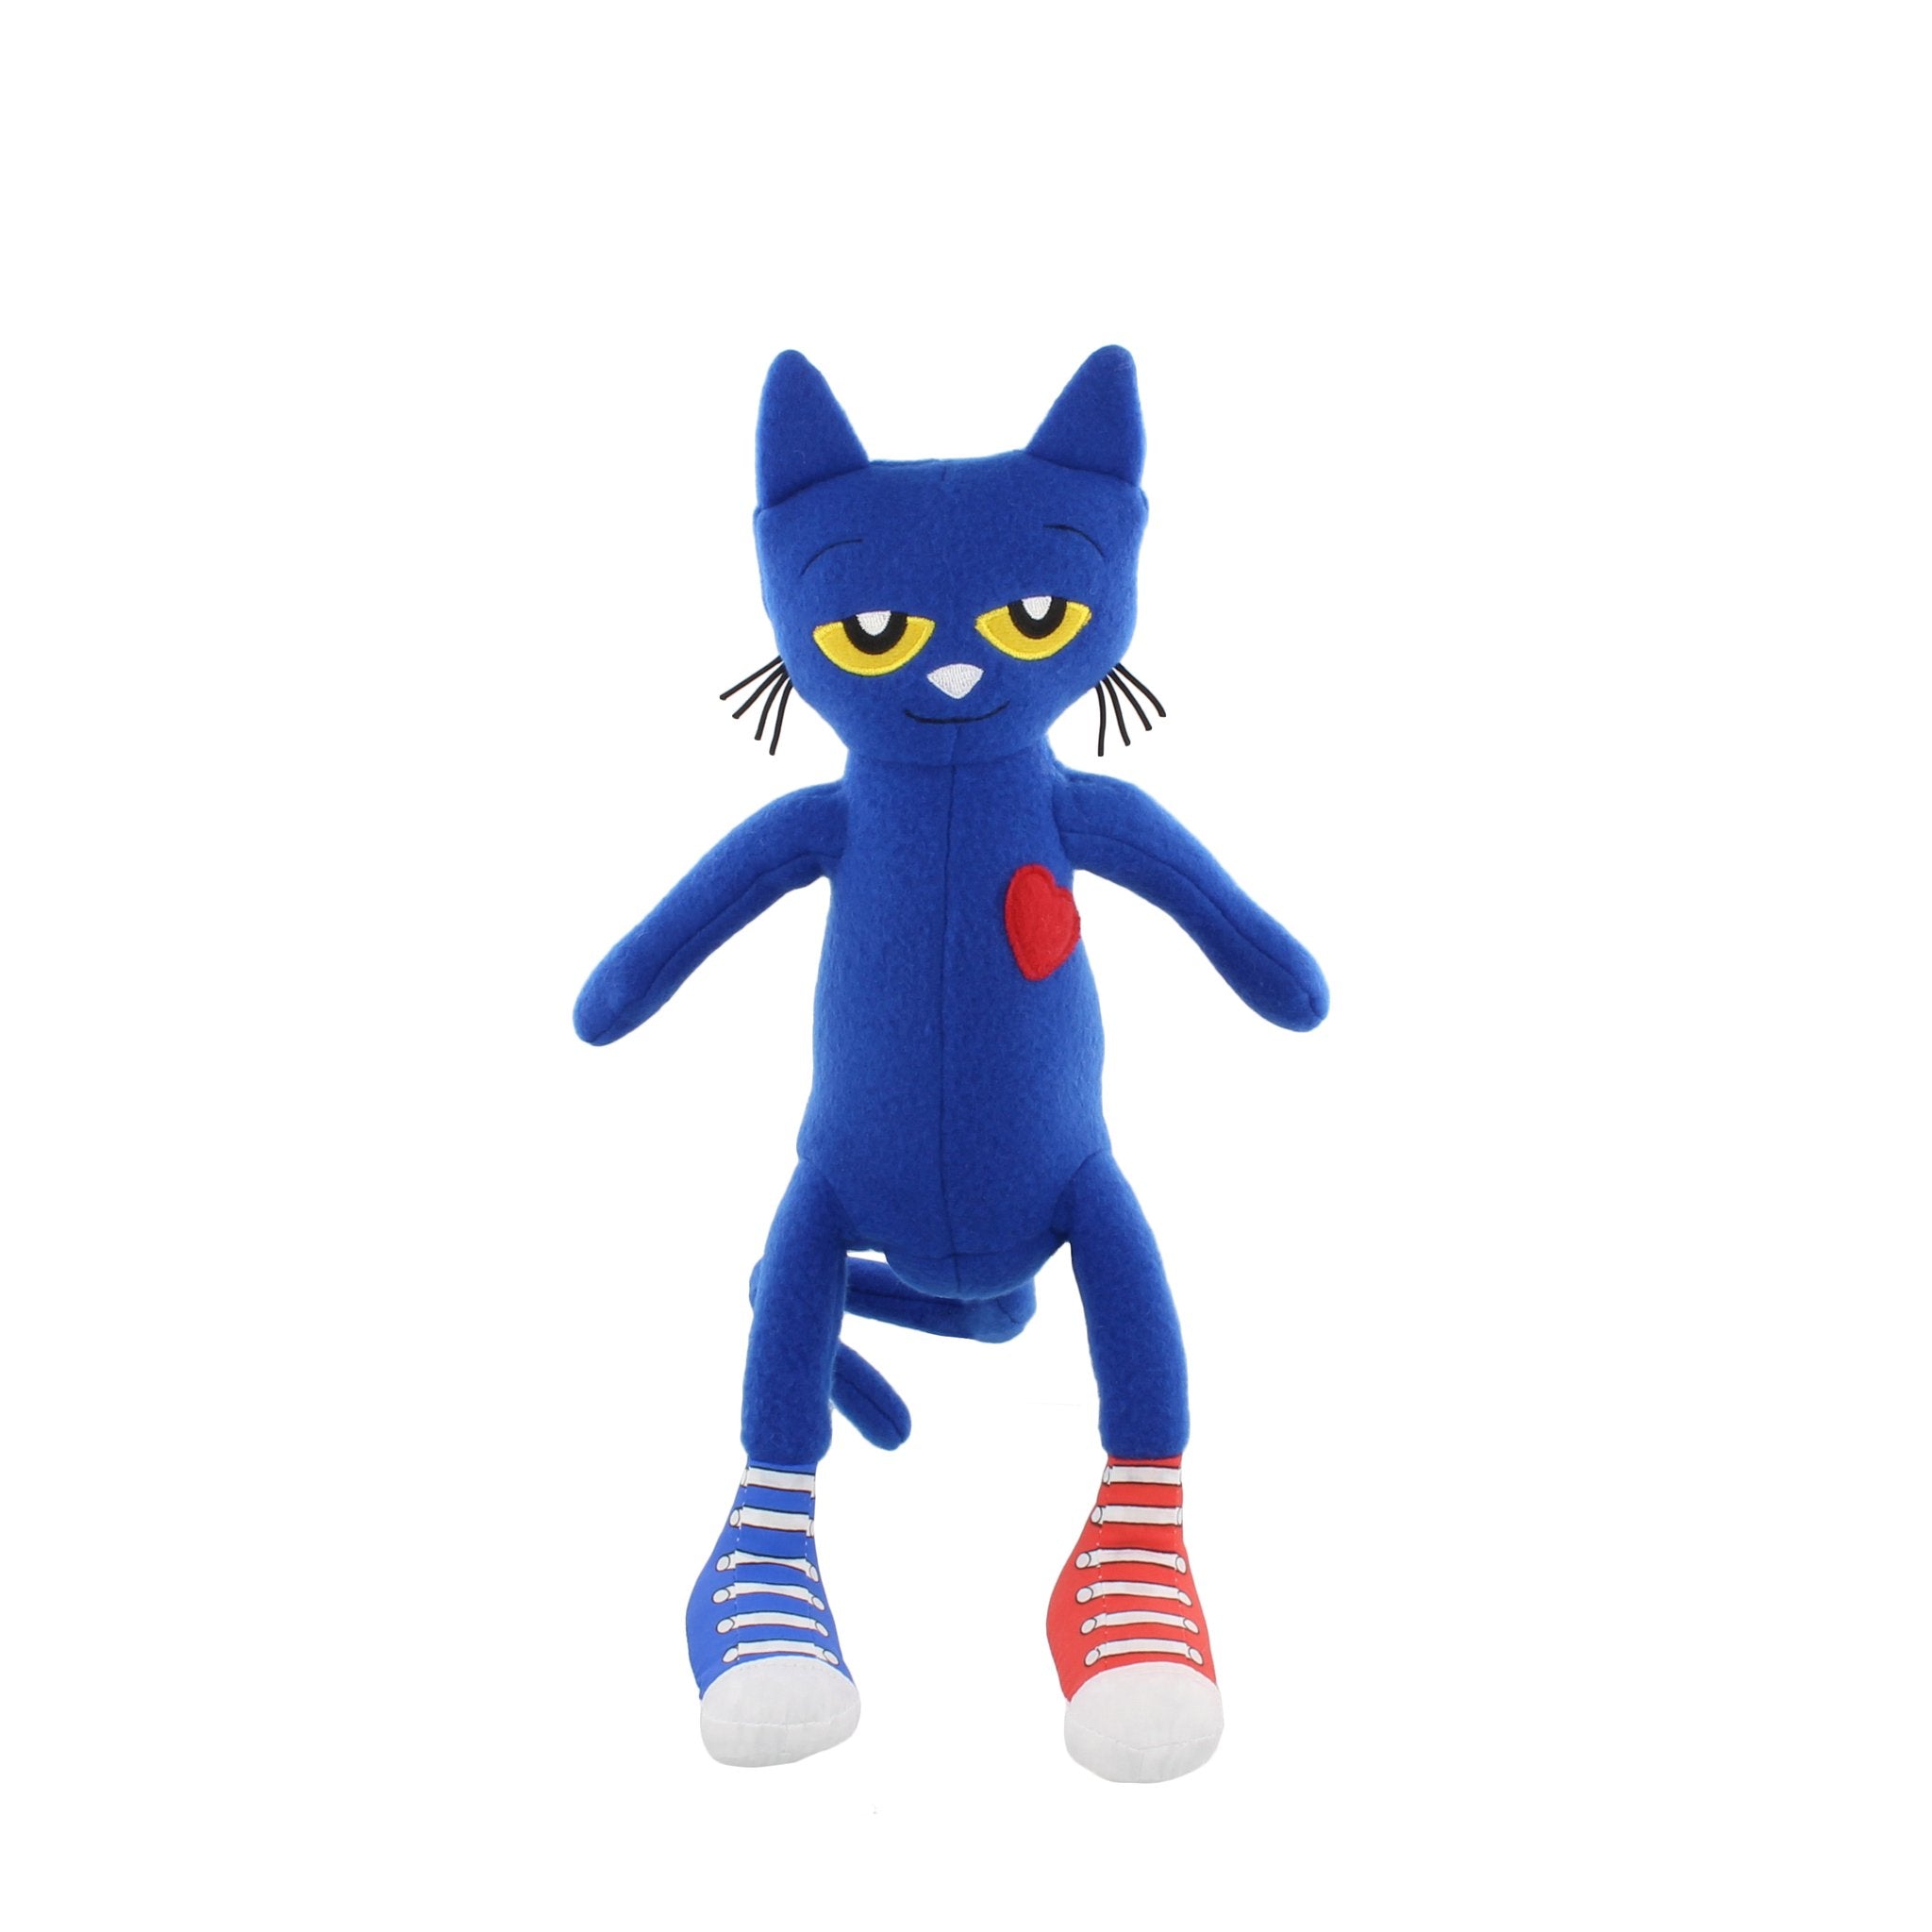 PETE THE CAT DOLL, 13 INCHES